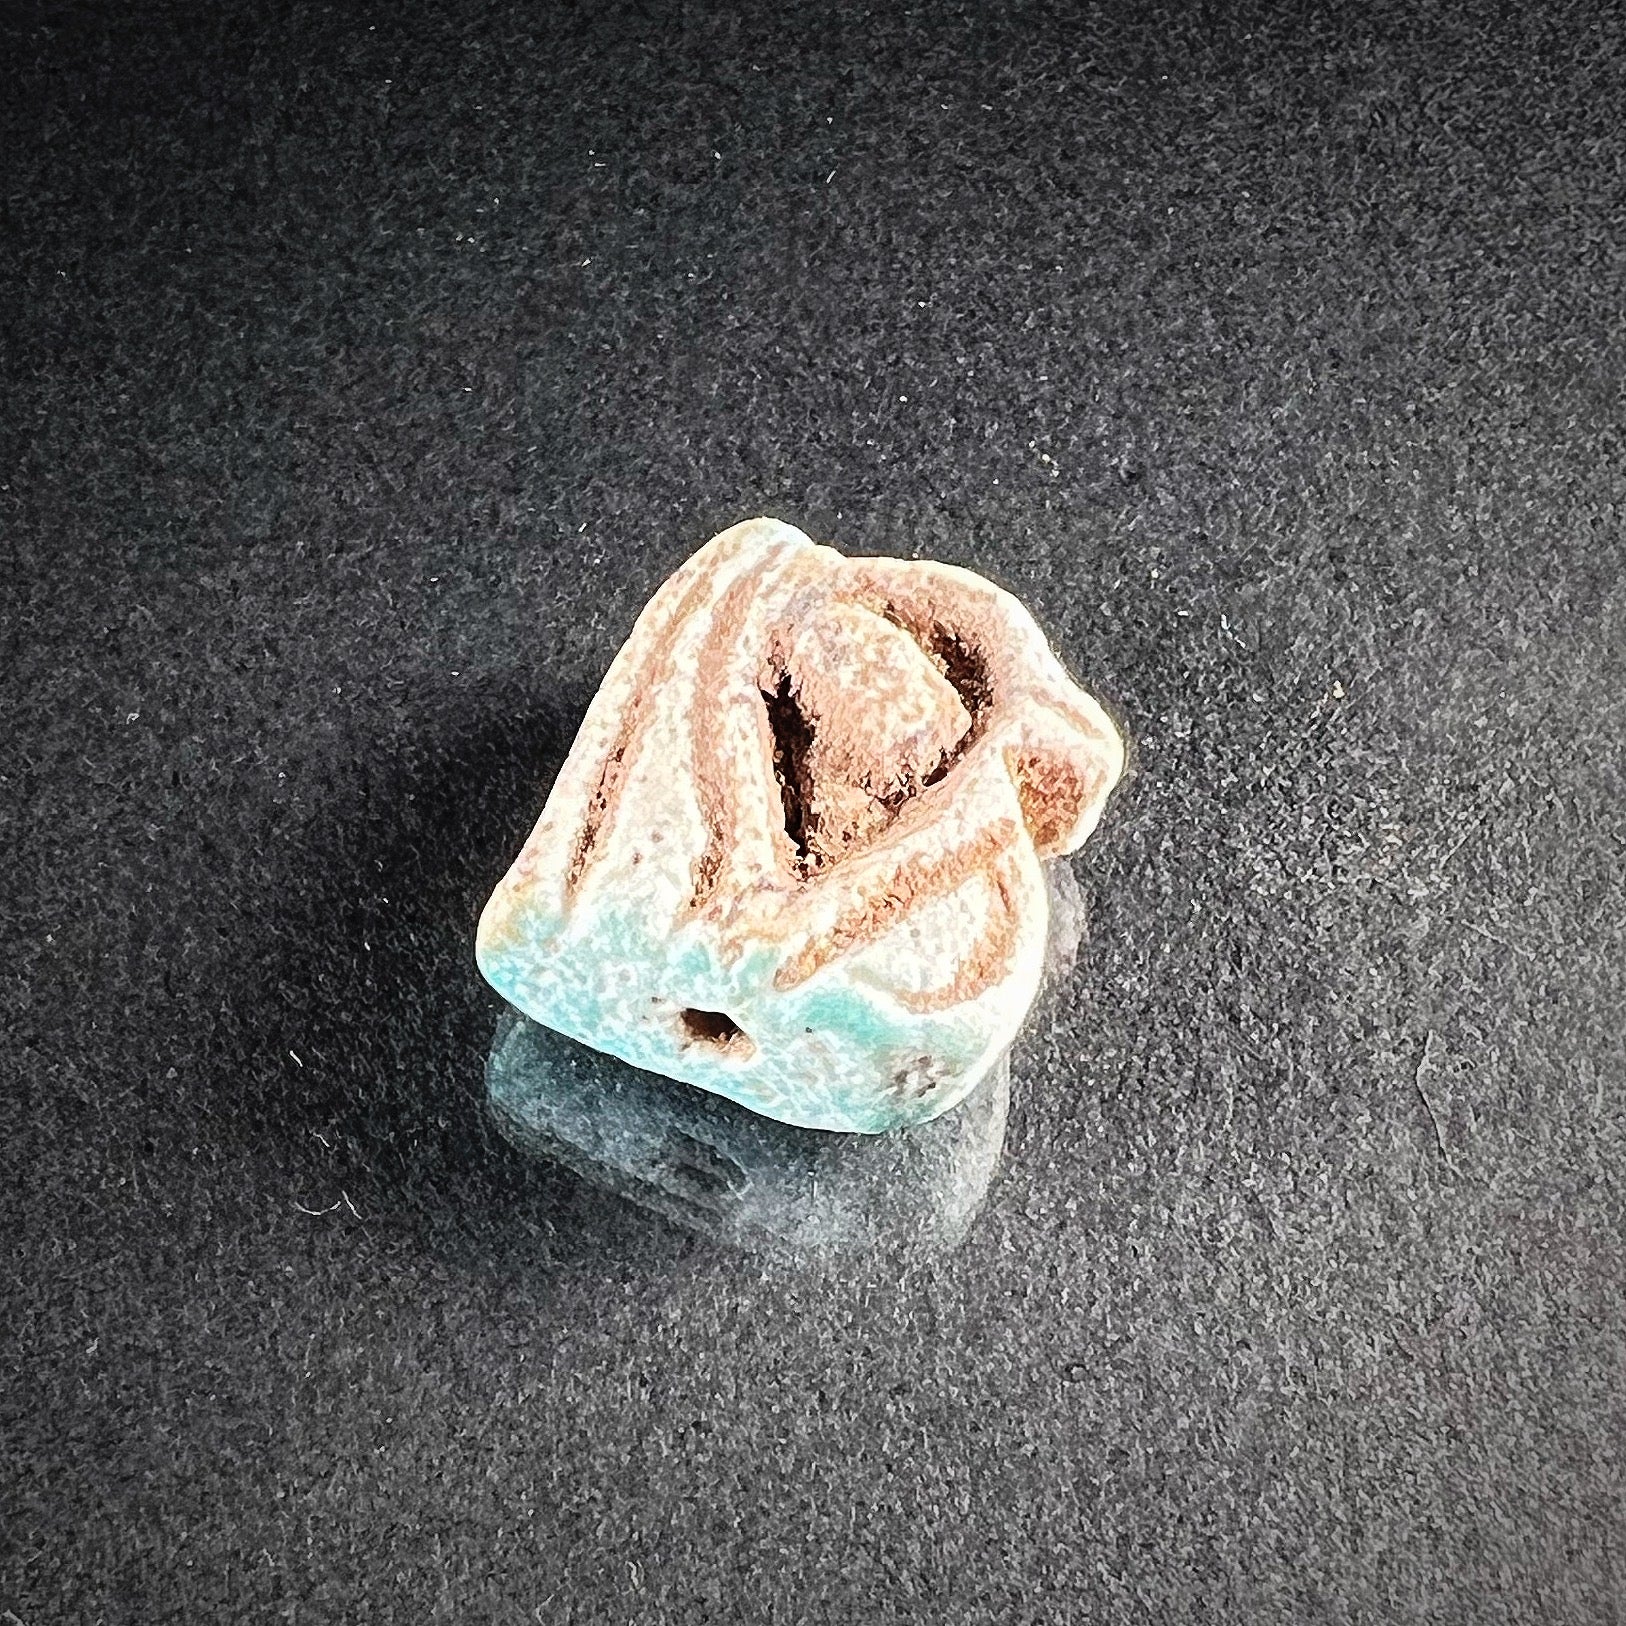  Wedjat-amulet from ancient Egypt made out of faience. Top view photo.